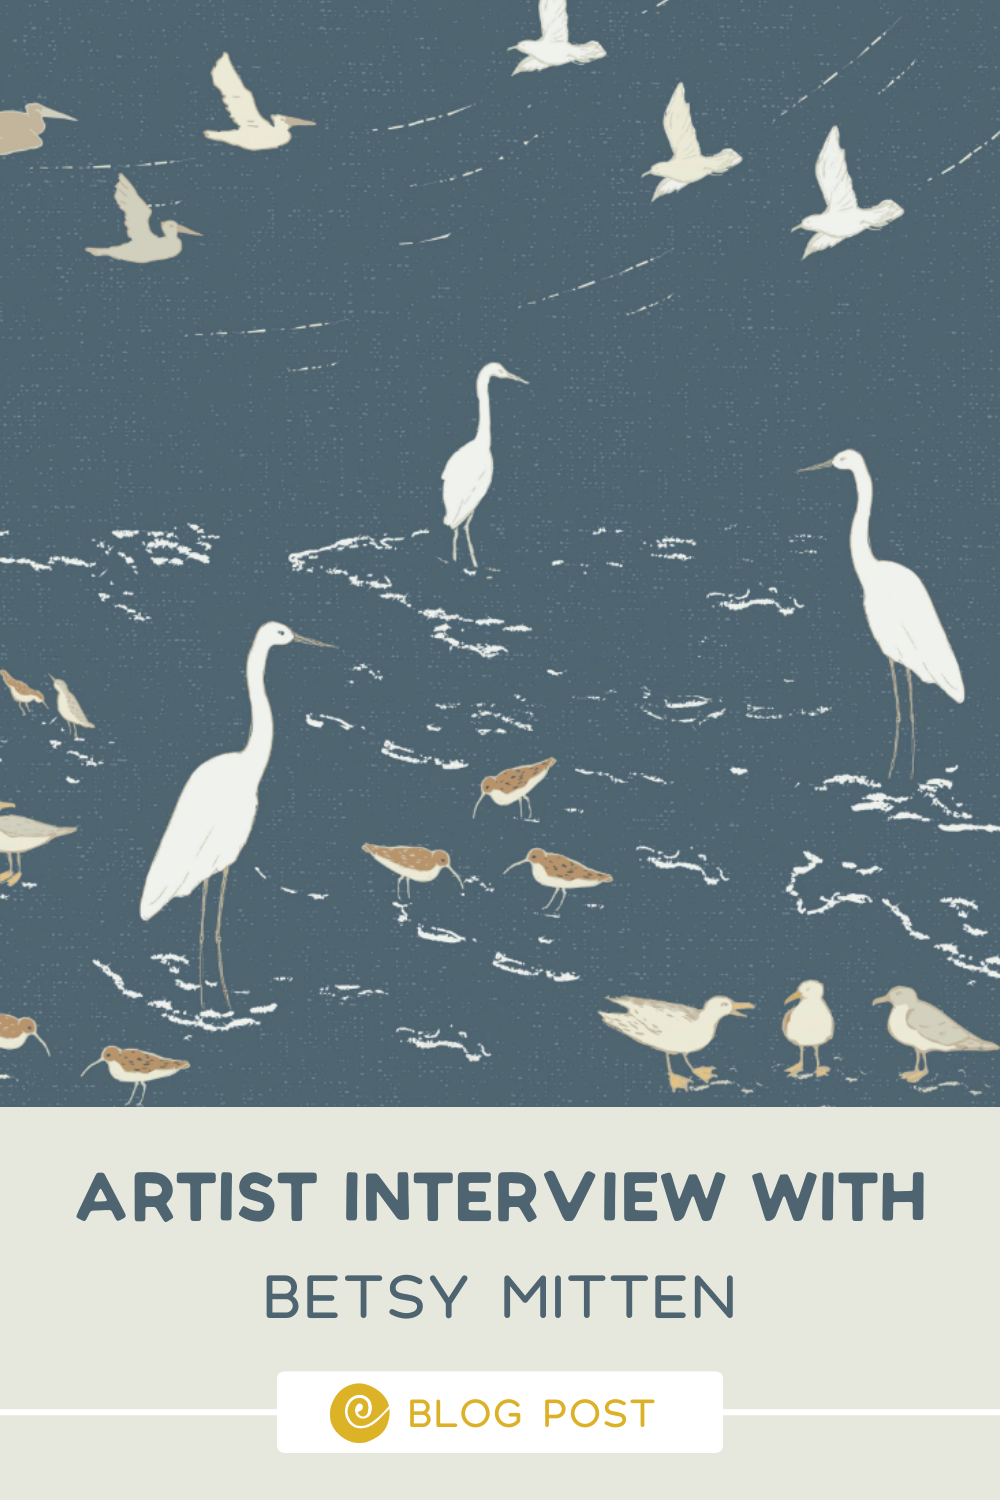 Pattern with birds and waves text reads Artist Interview with Betsy Mitten